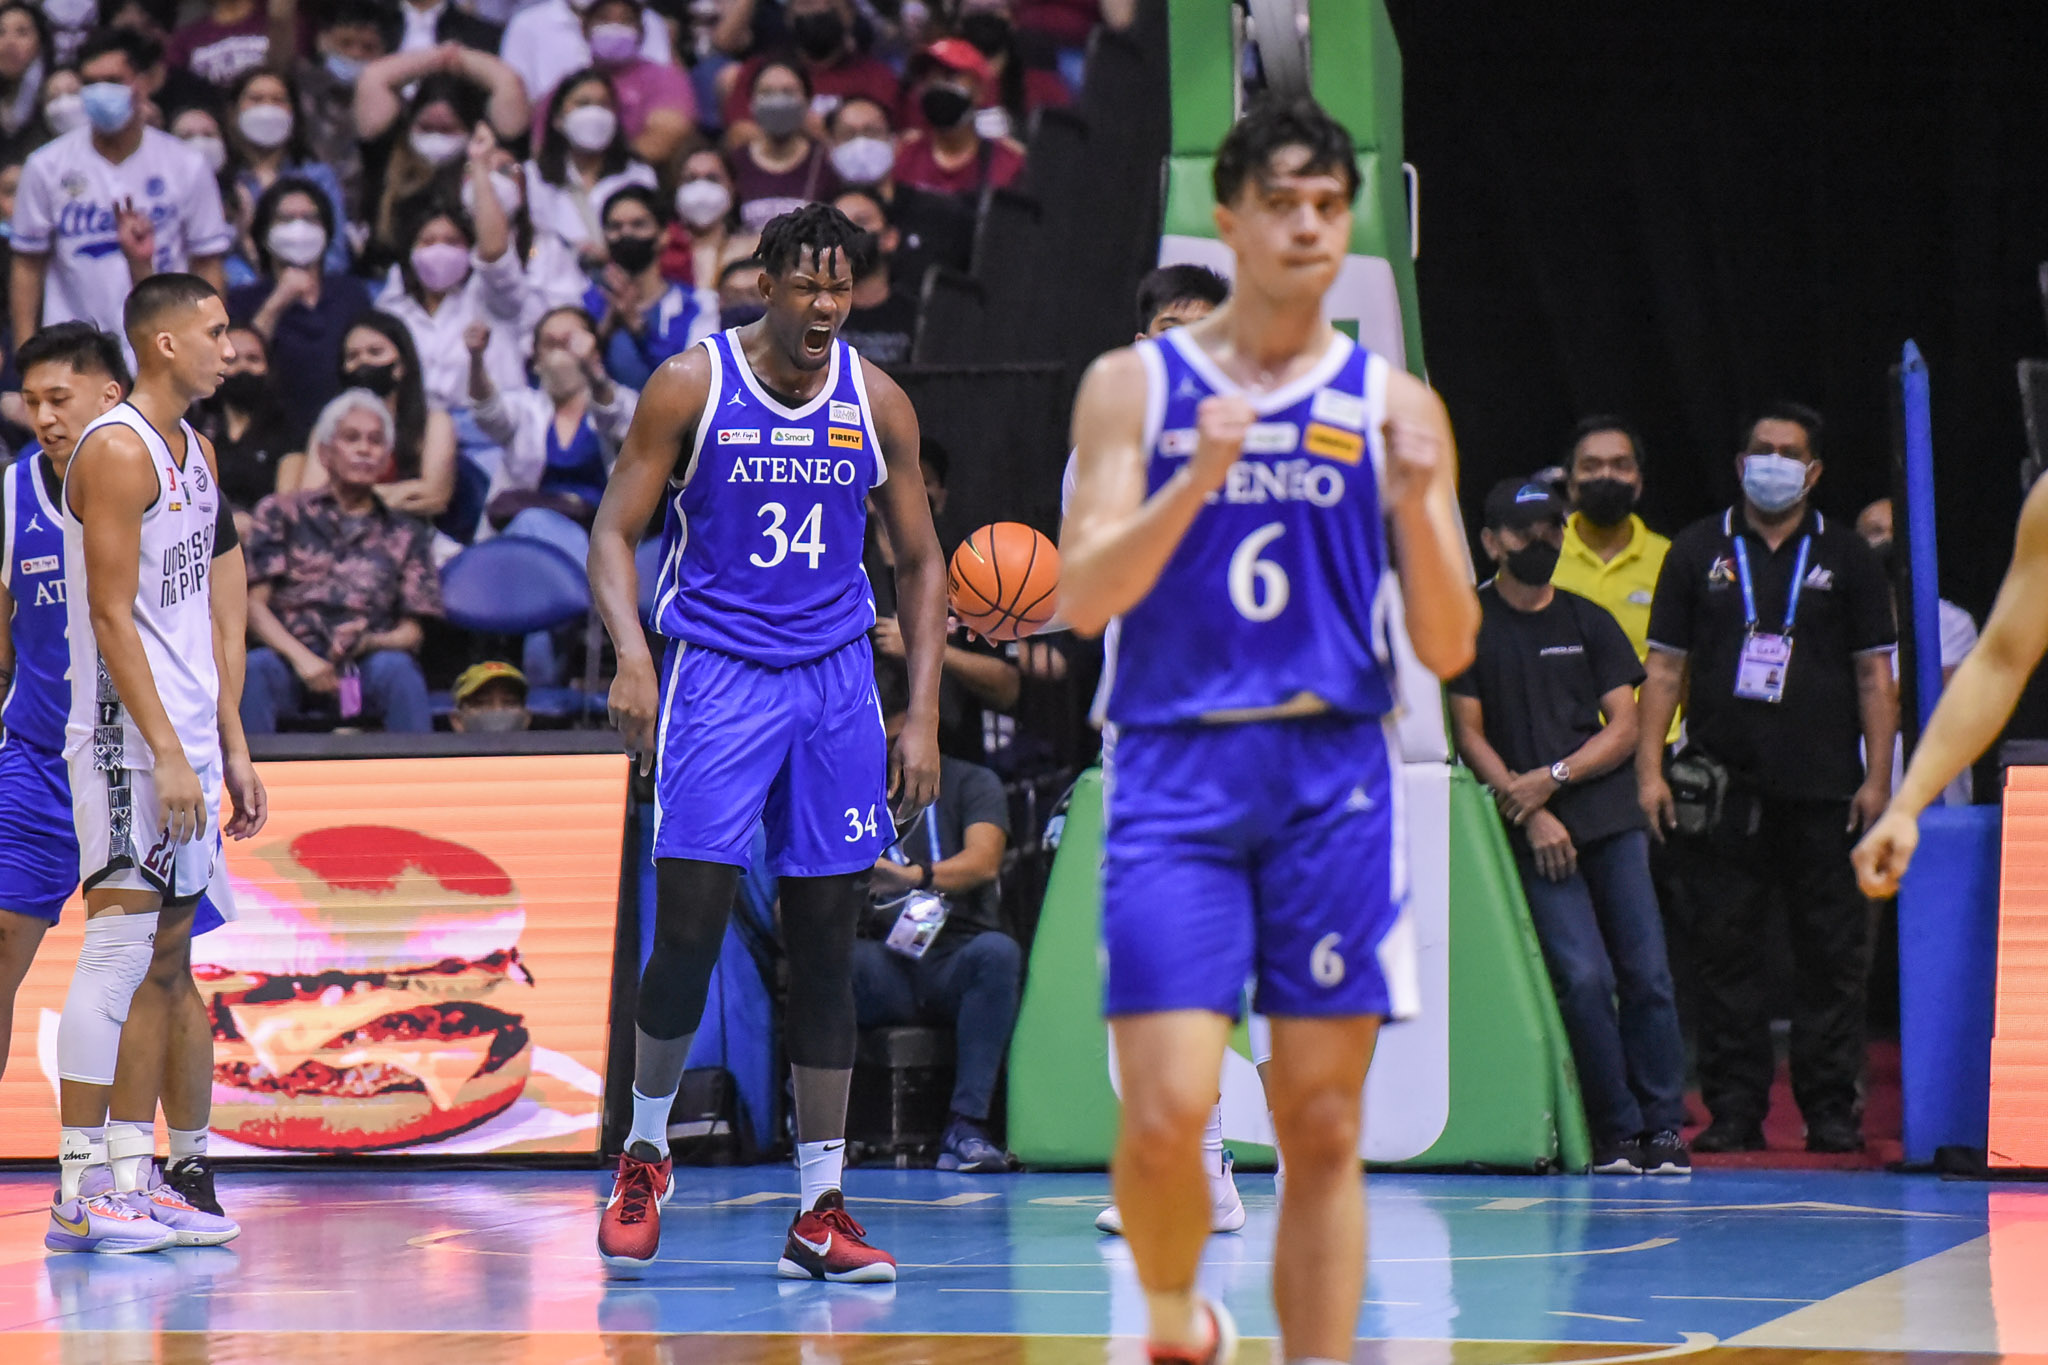 UAAP-85-MBB-ADMU-vs.-UP-Ange-Kouame-9075-1 Baldwin vows Ateneo will not let guard down vs Adamson: 'Play to win' ADMU Basketball News UAAP  - philippine sports news